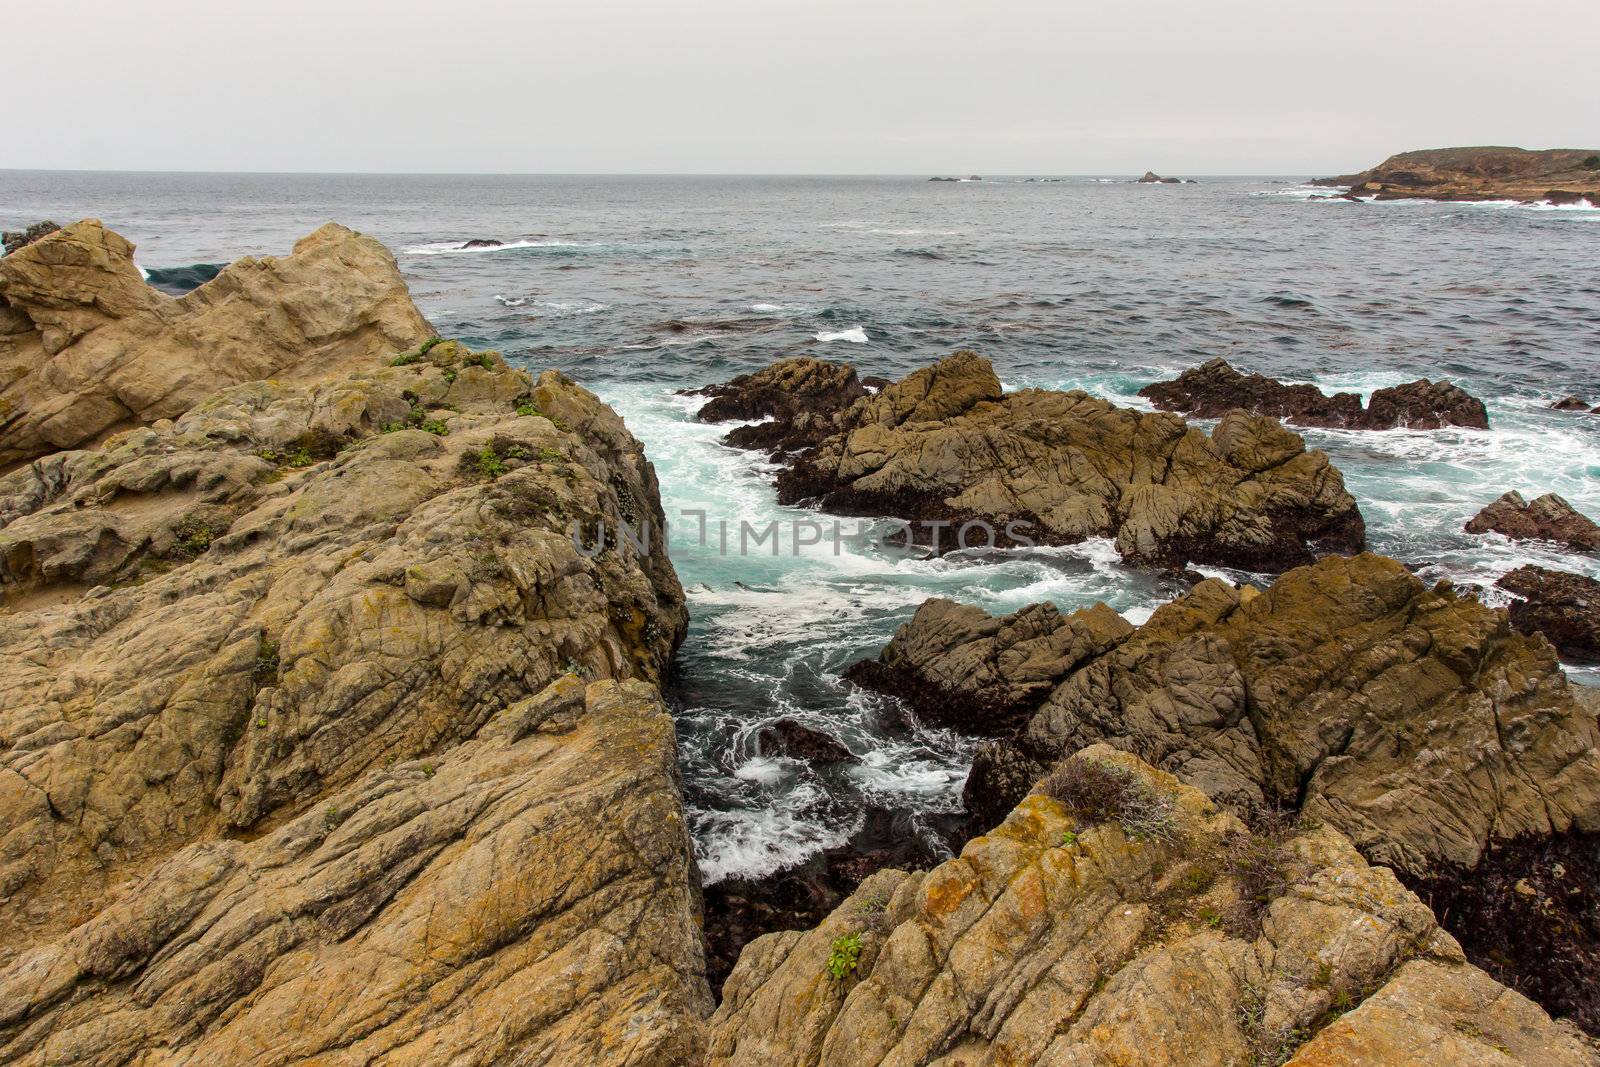 Spectacular Rock Formations at Point Lobos State Natural Reserve